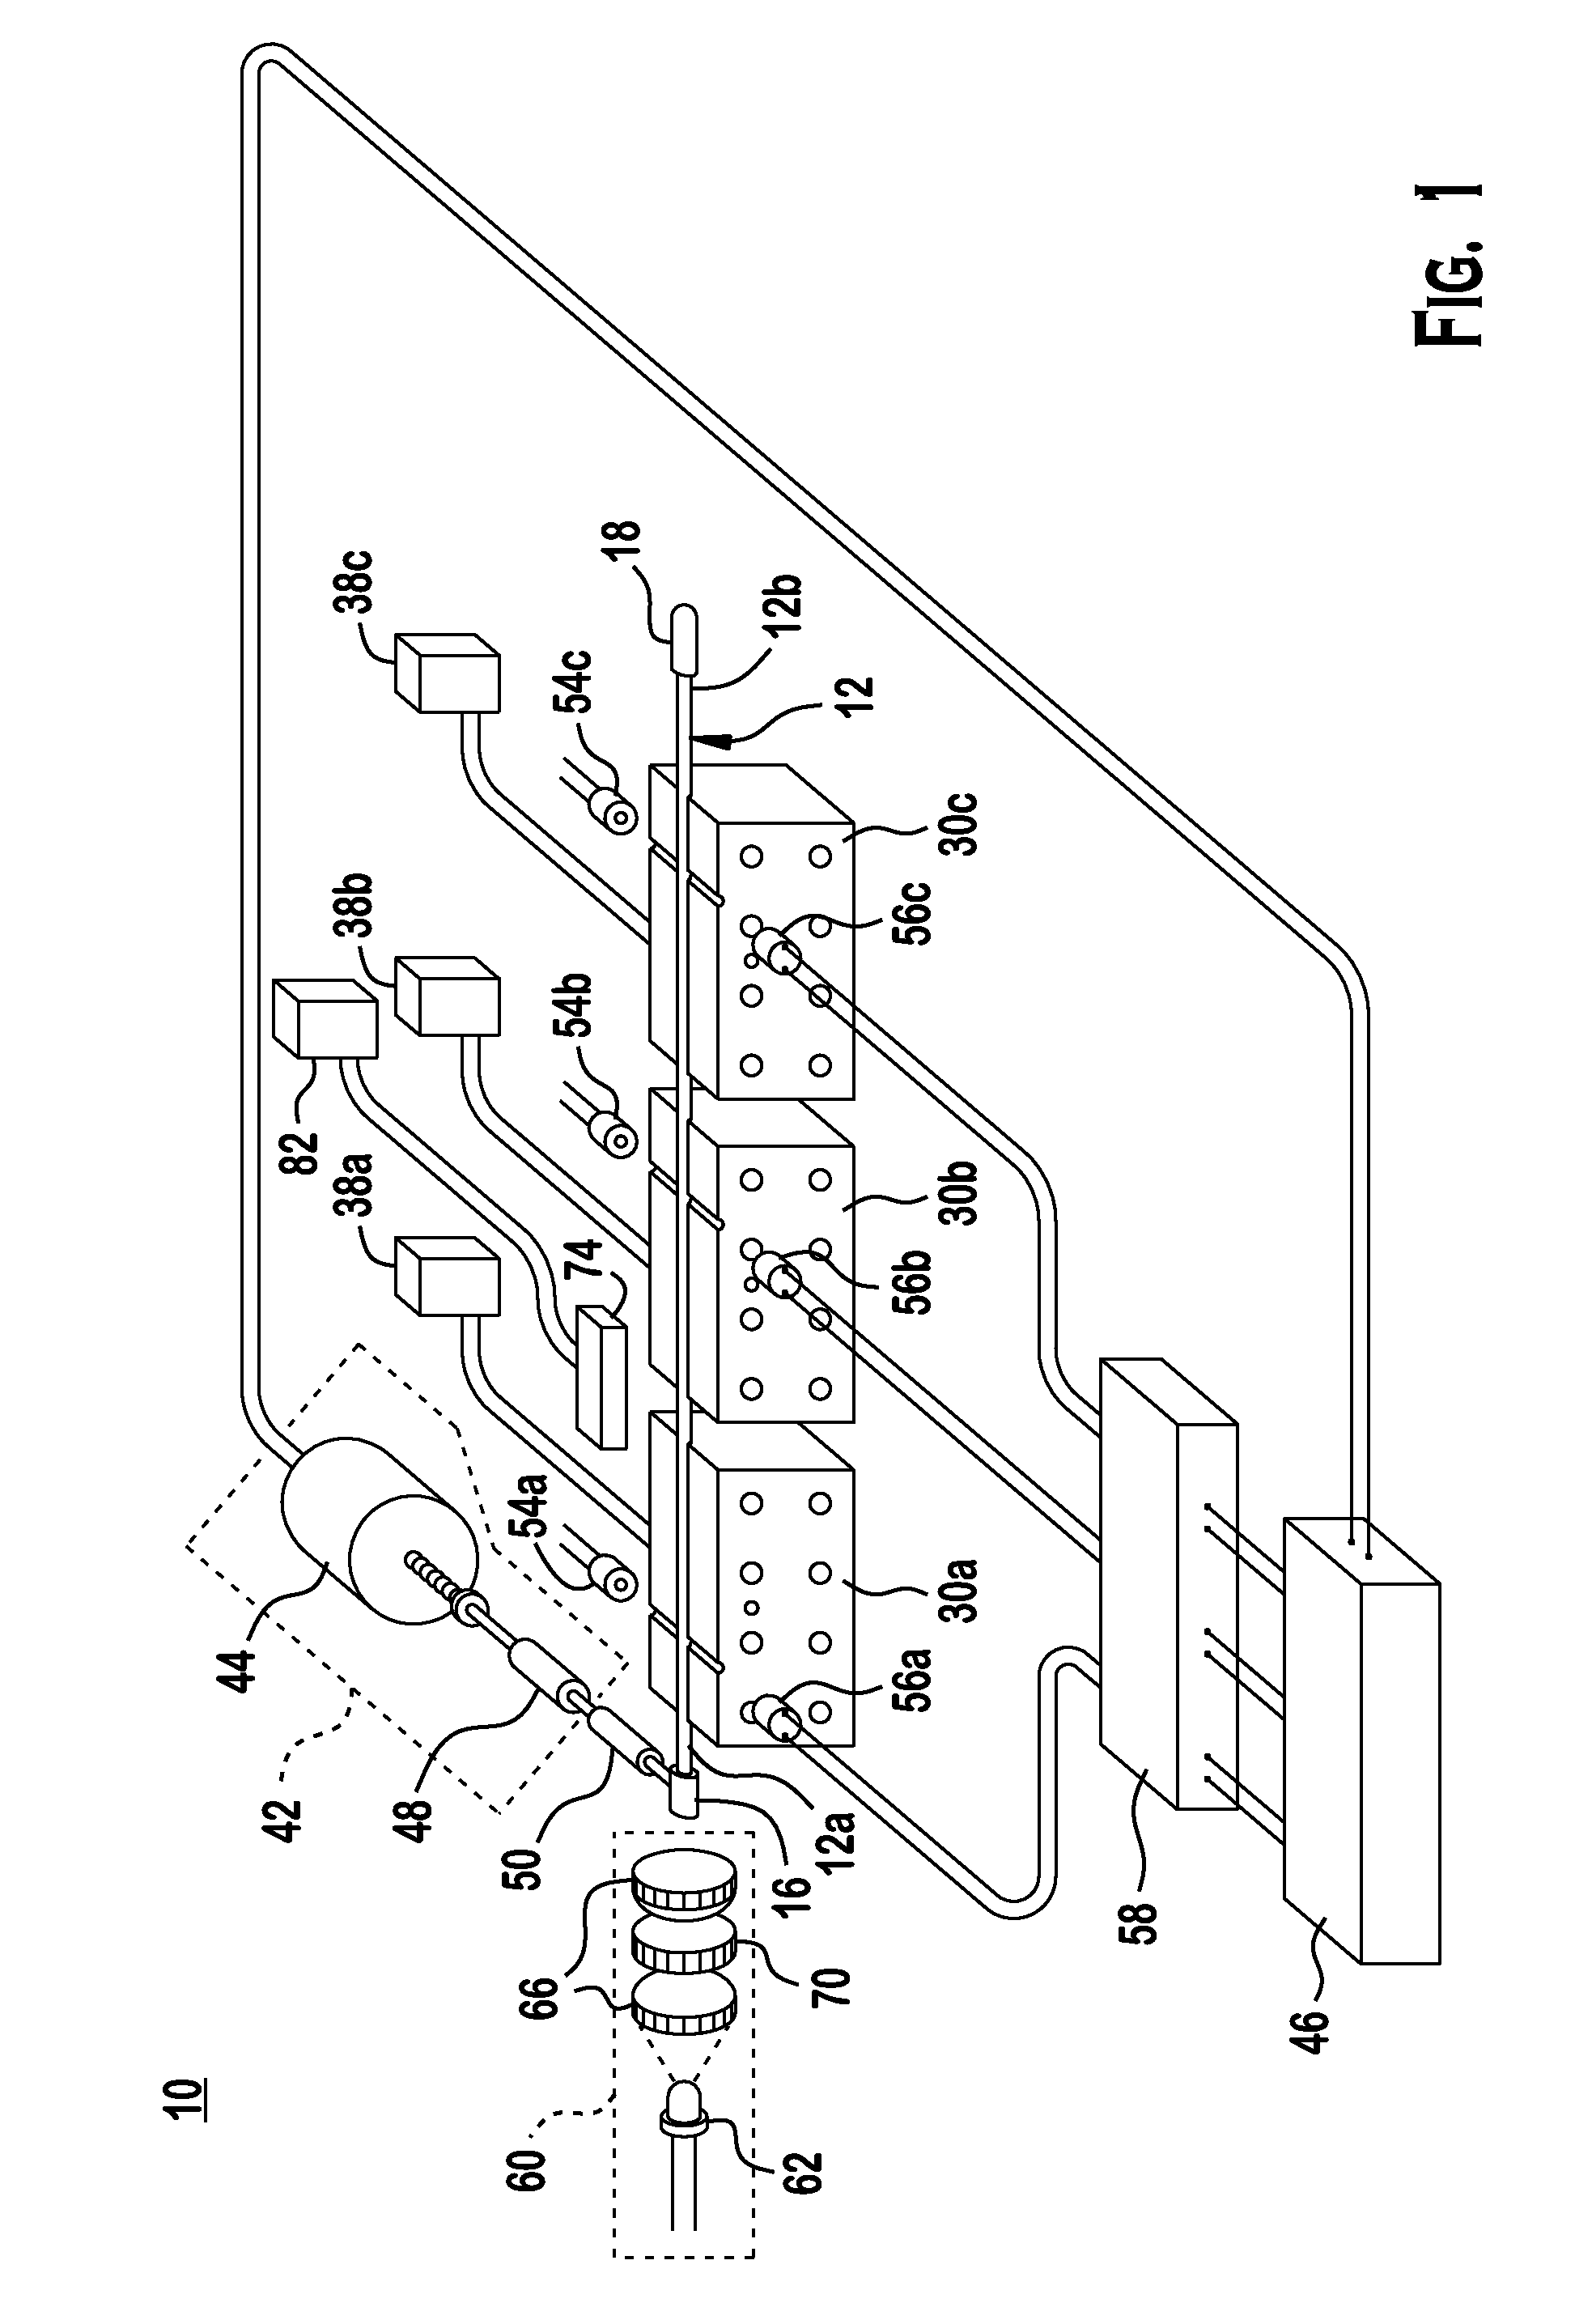 Method and Apparatus for Rapidly and Cyclically Heating and Cooling a Fluid Sample During PCR Testing